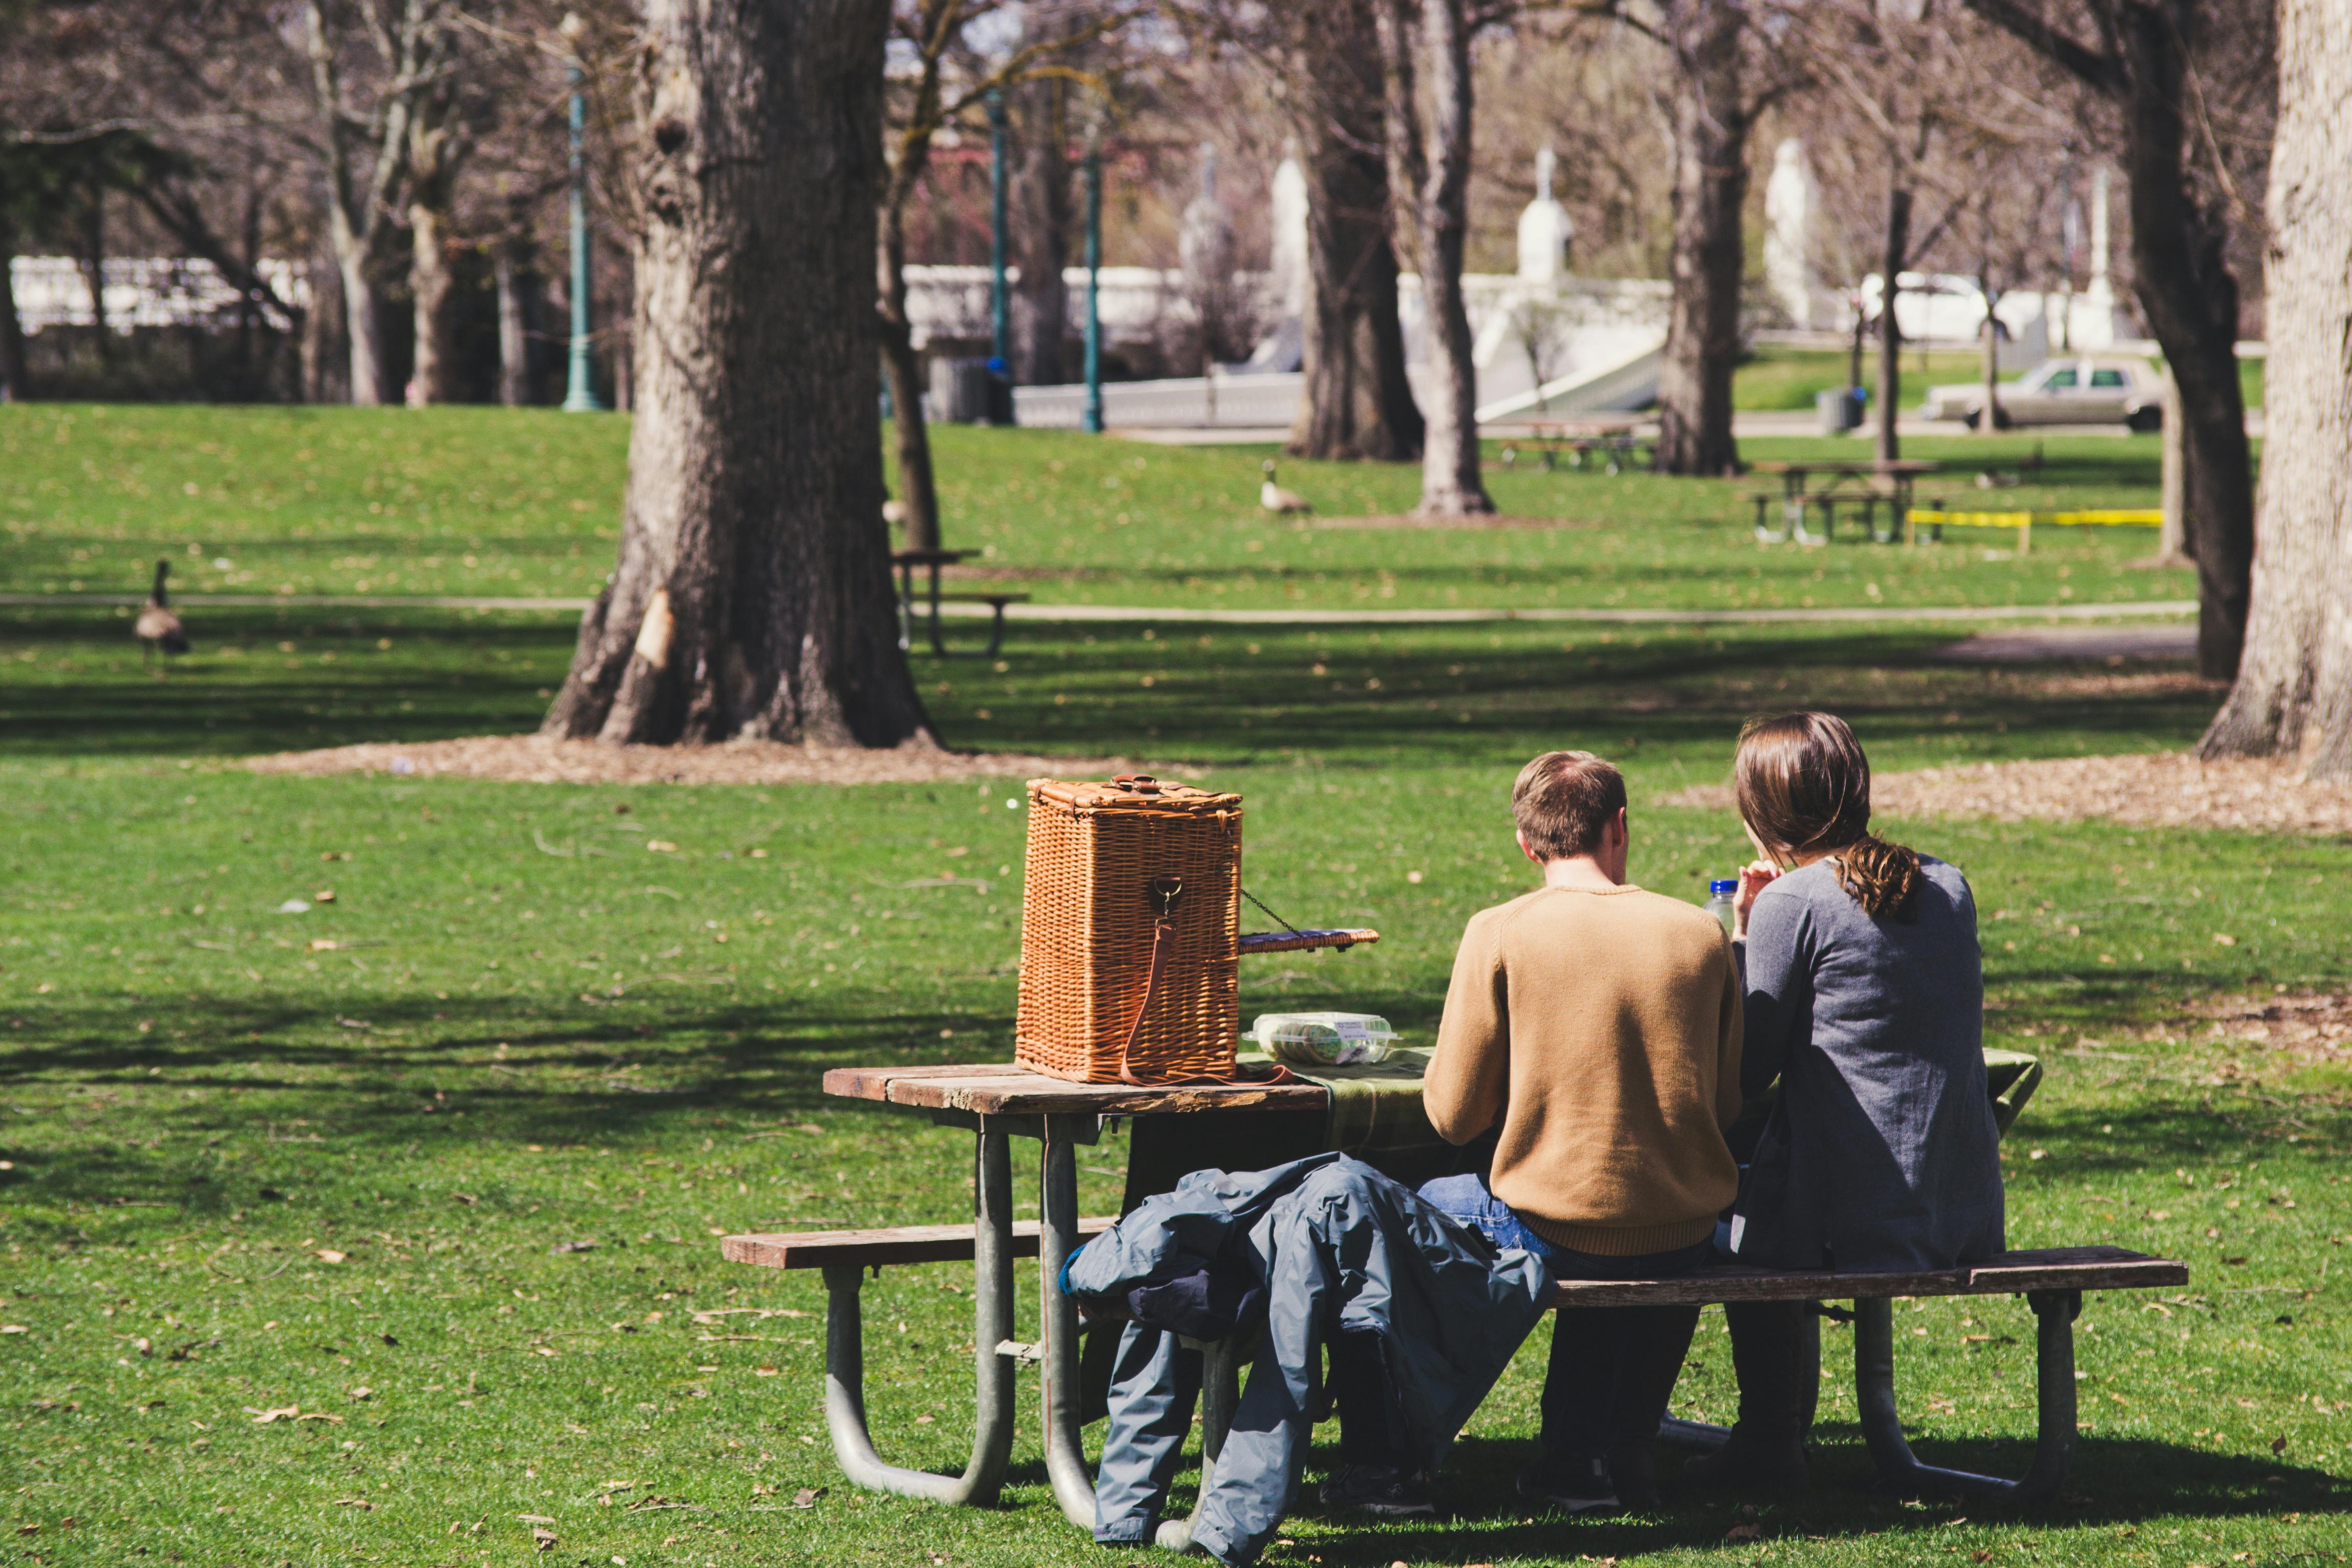 A man and a woman sitting at a picnic table | Source: Pexels